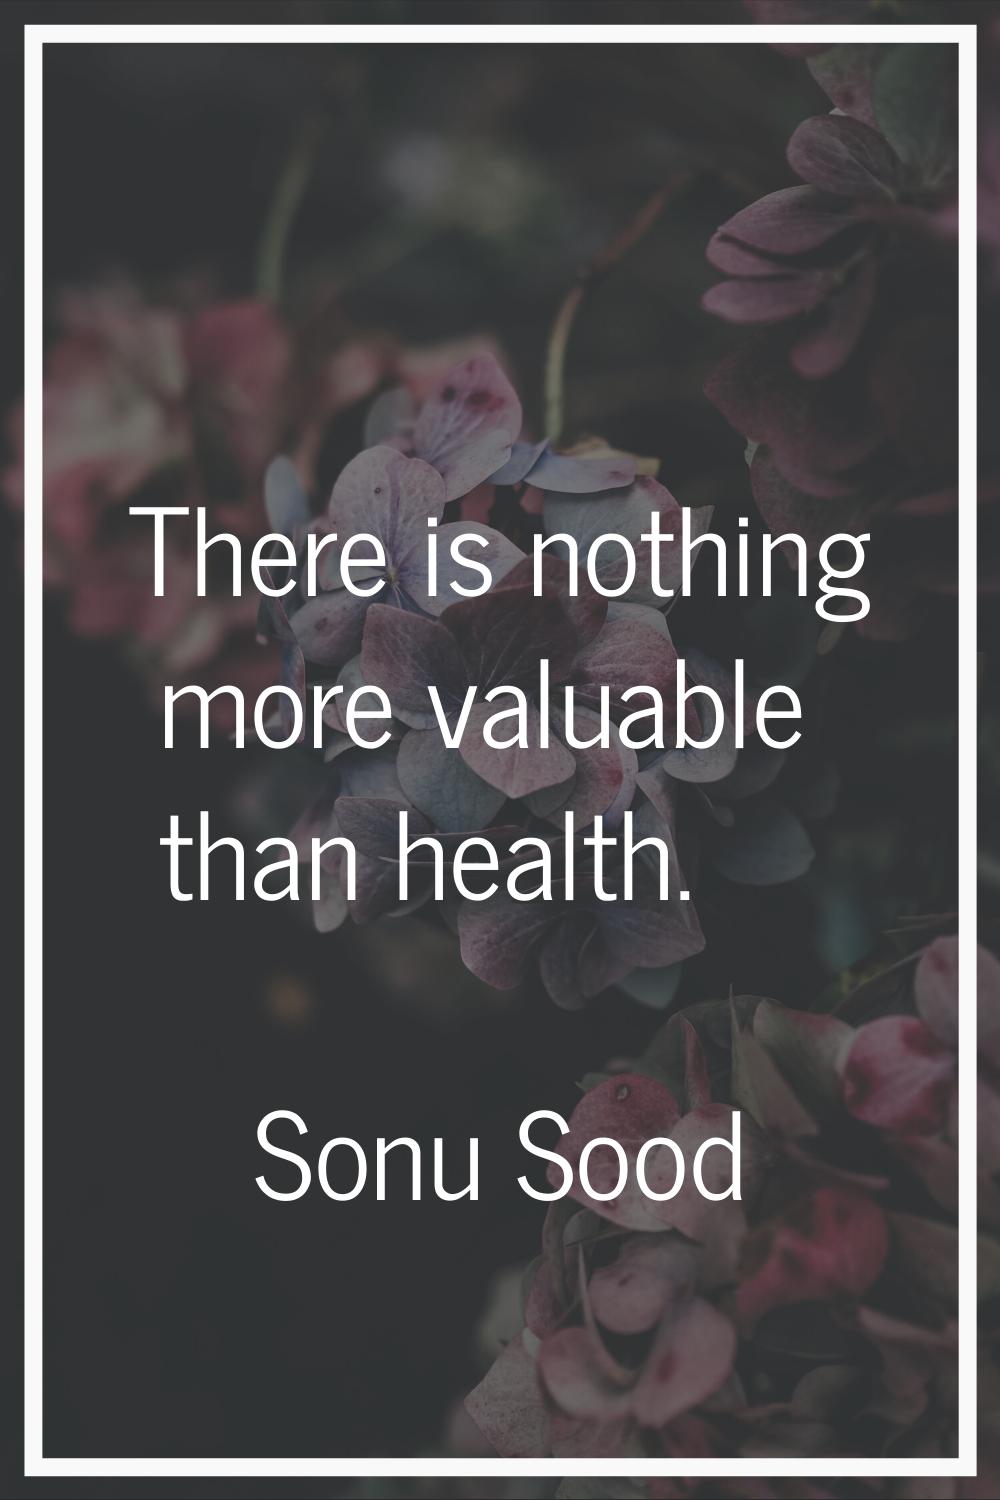 There is nothing more valuable than health.